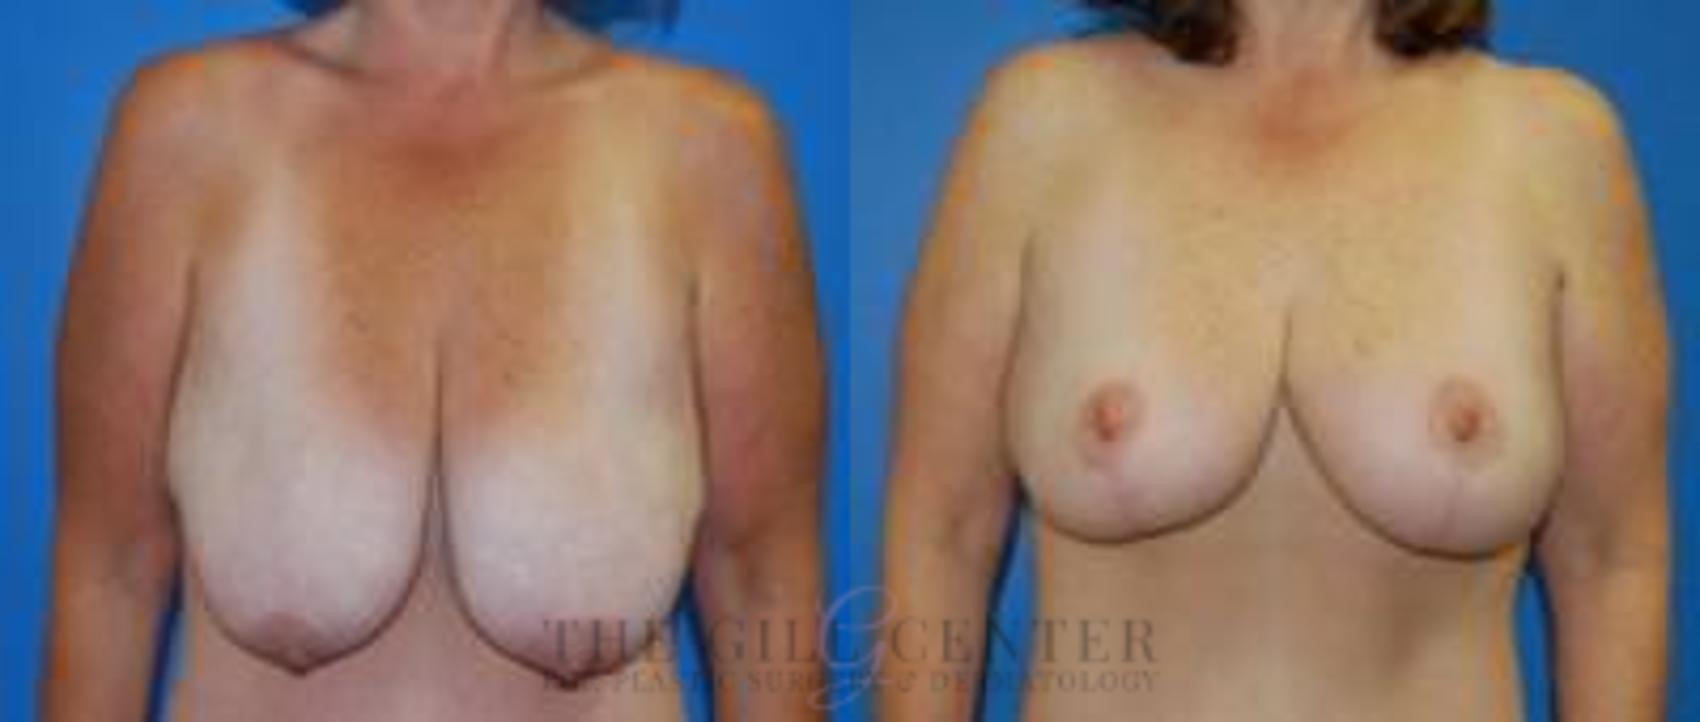 Breast Lift Case 85 Before & After Front | The Woodlands, TX | The Gill Center for Plastic Surgery and Dermatology